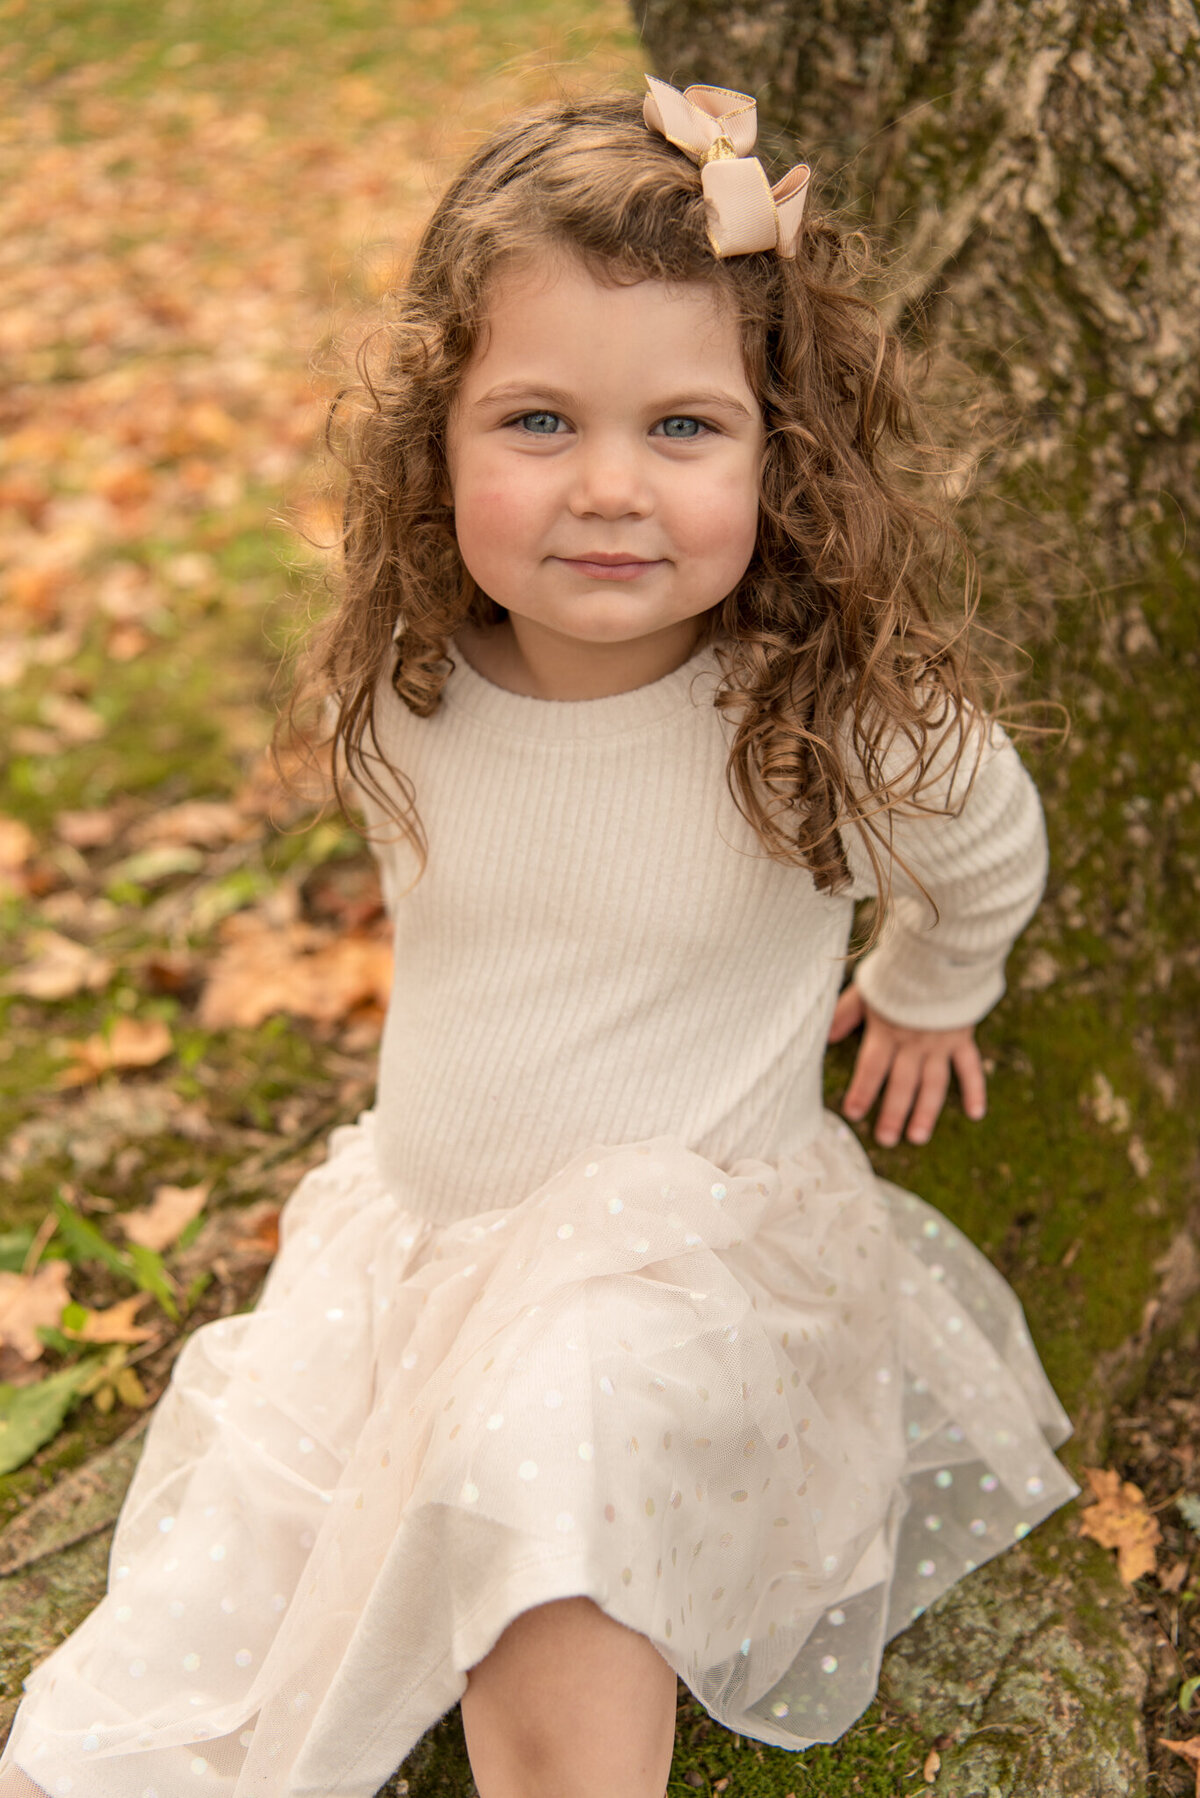 Young girl in white dress sitting at the base of a tree with fall leaves all around